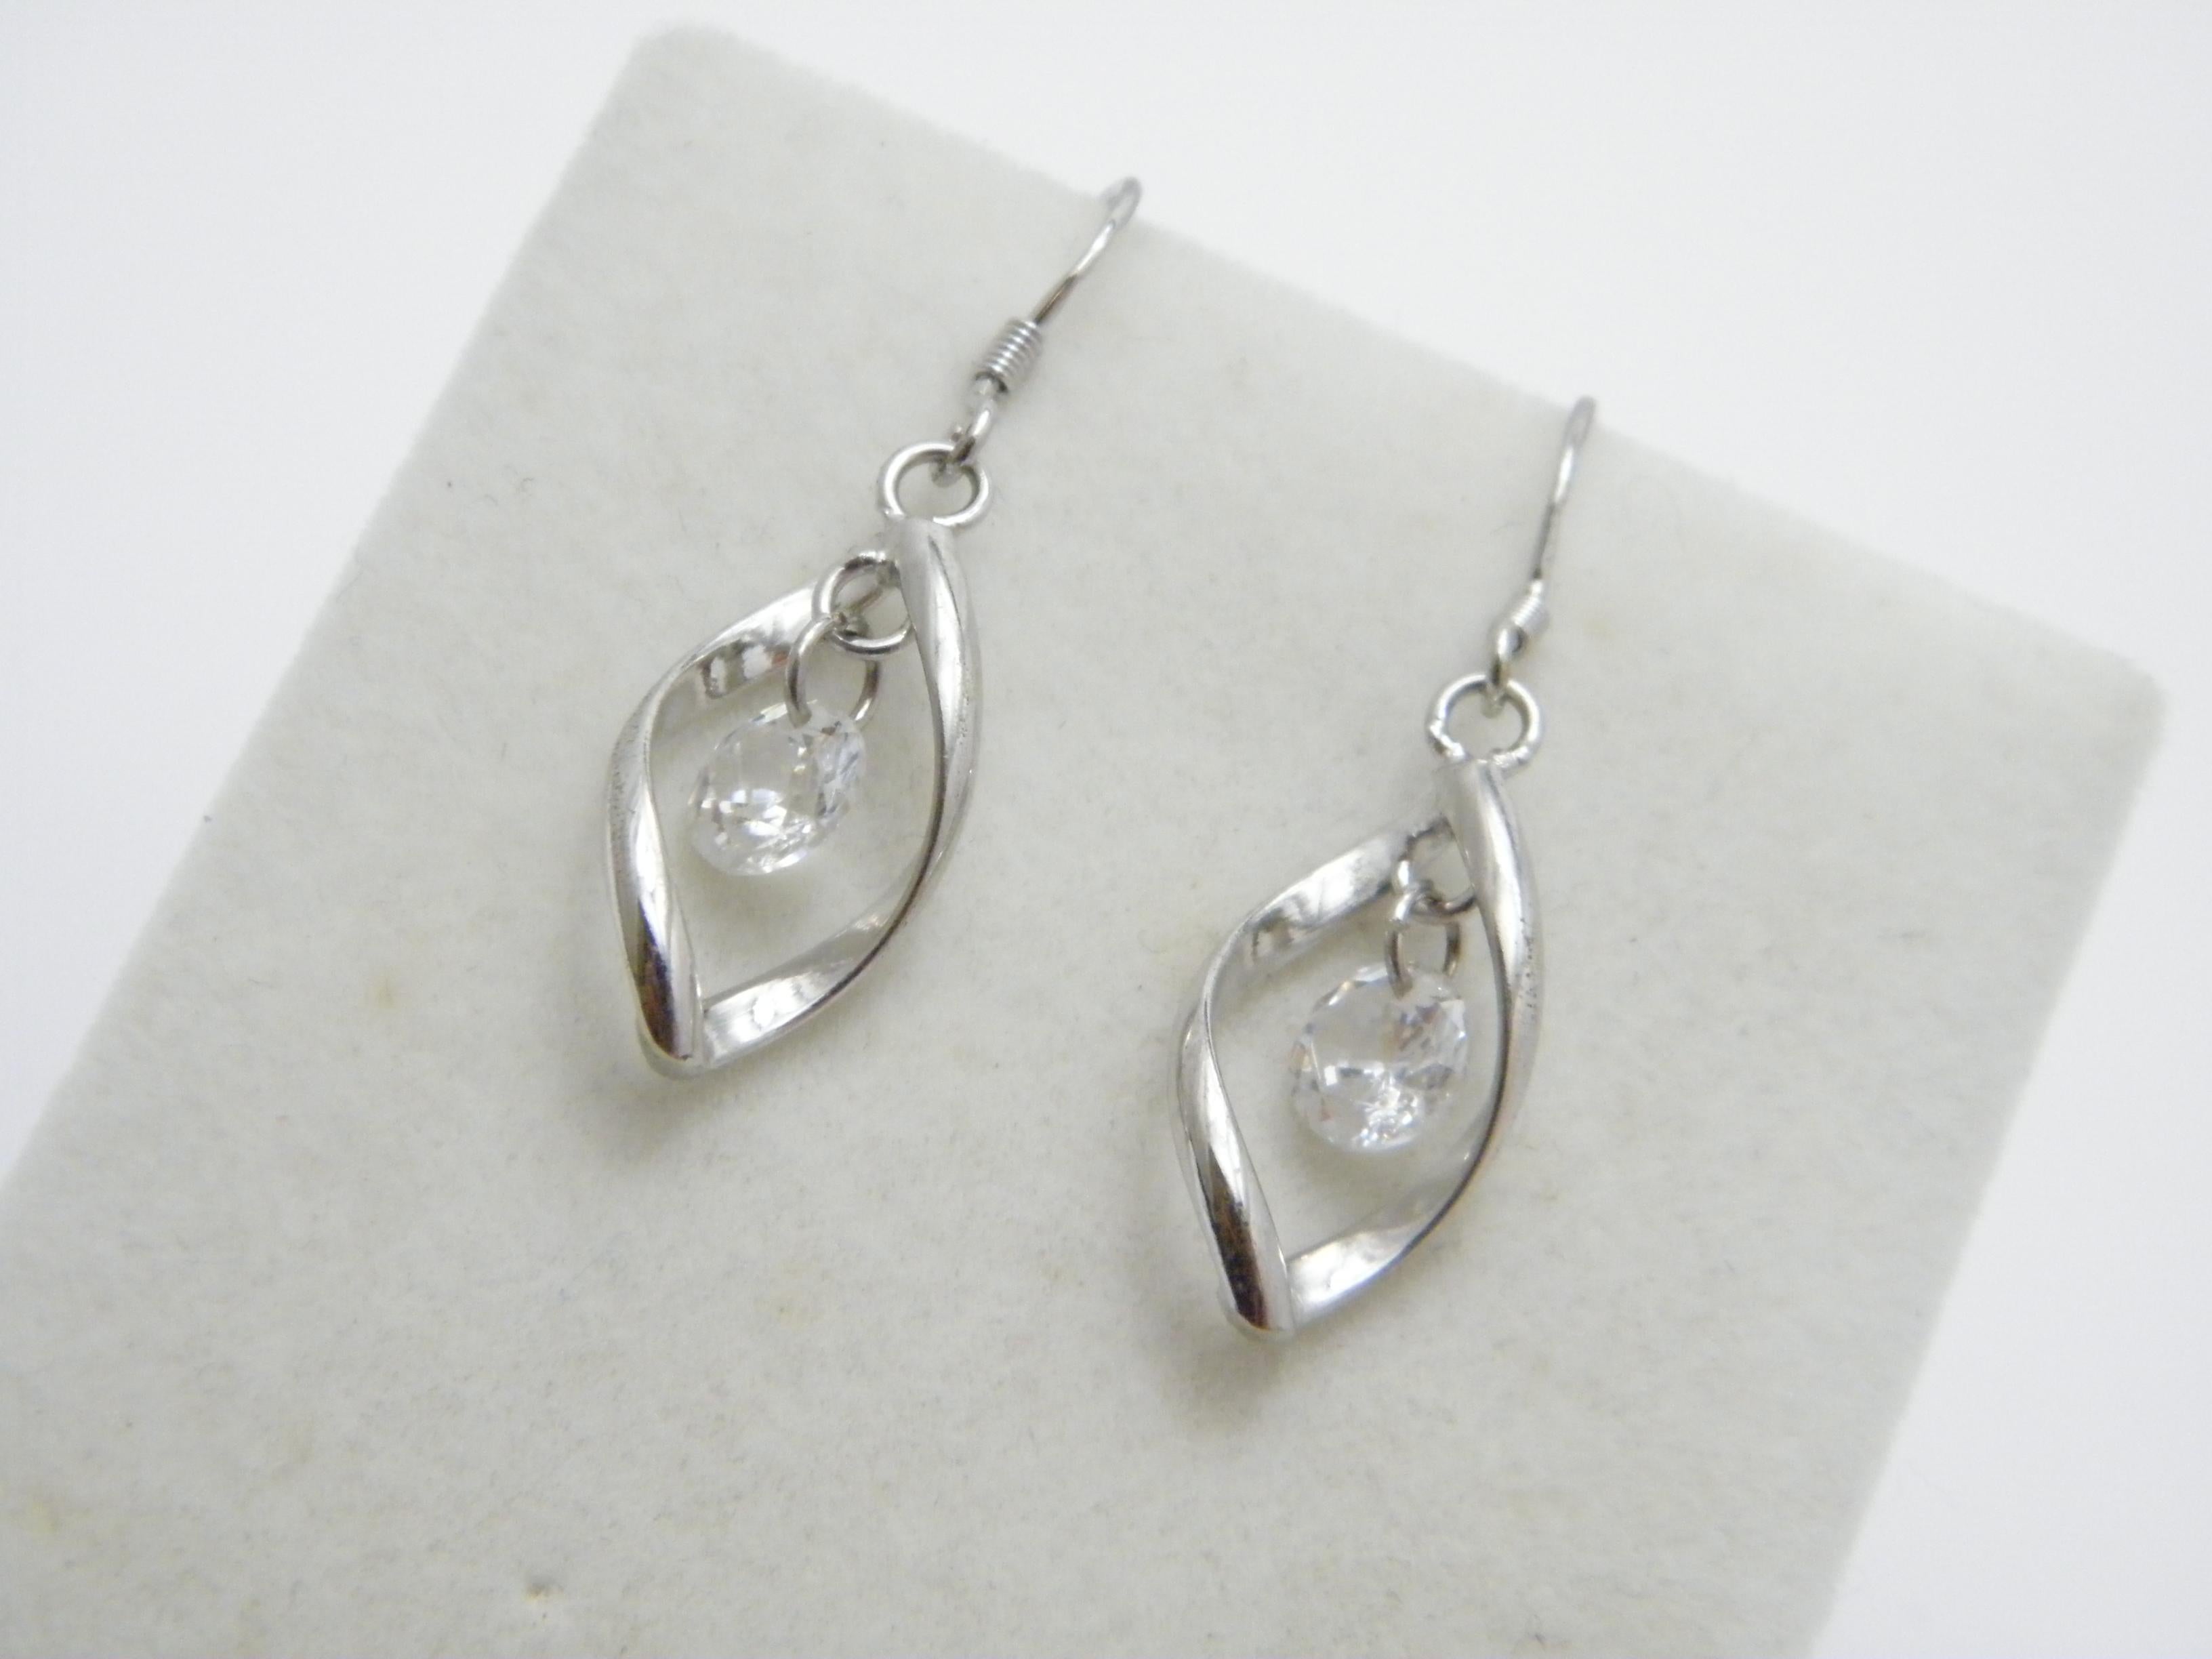 A very special item for you to consider:

9CT WHITE GOLD DIAMOND PASTE DROP DANGLE EARRINGS

DETAILS
Material: 9ct 375/000 White Gold
Style: Art Deco stylish and elegant drop / dangle earrings
Gemstone: Round facet cut sparkling diamond paste stones